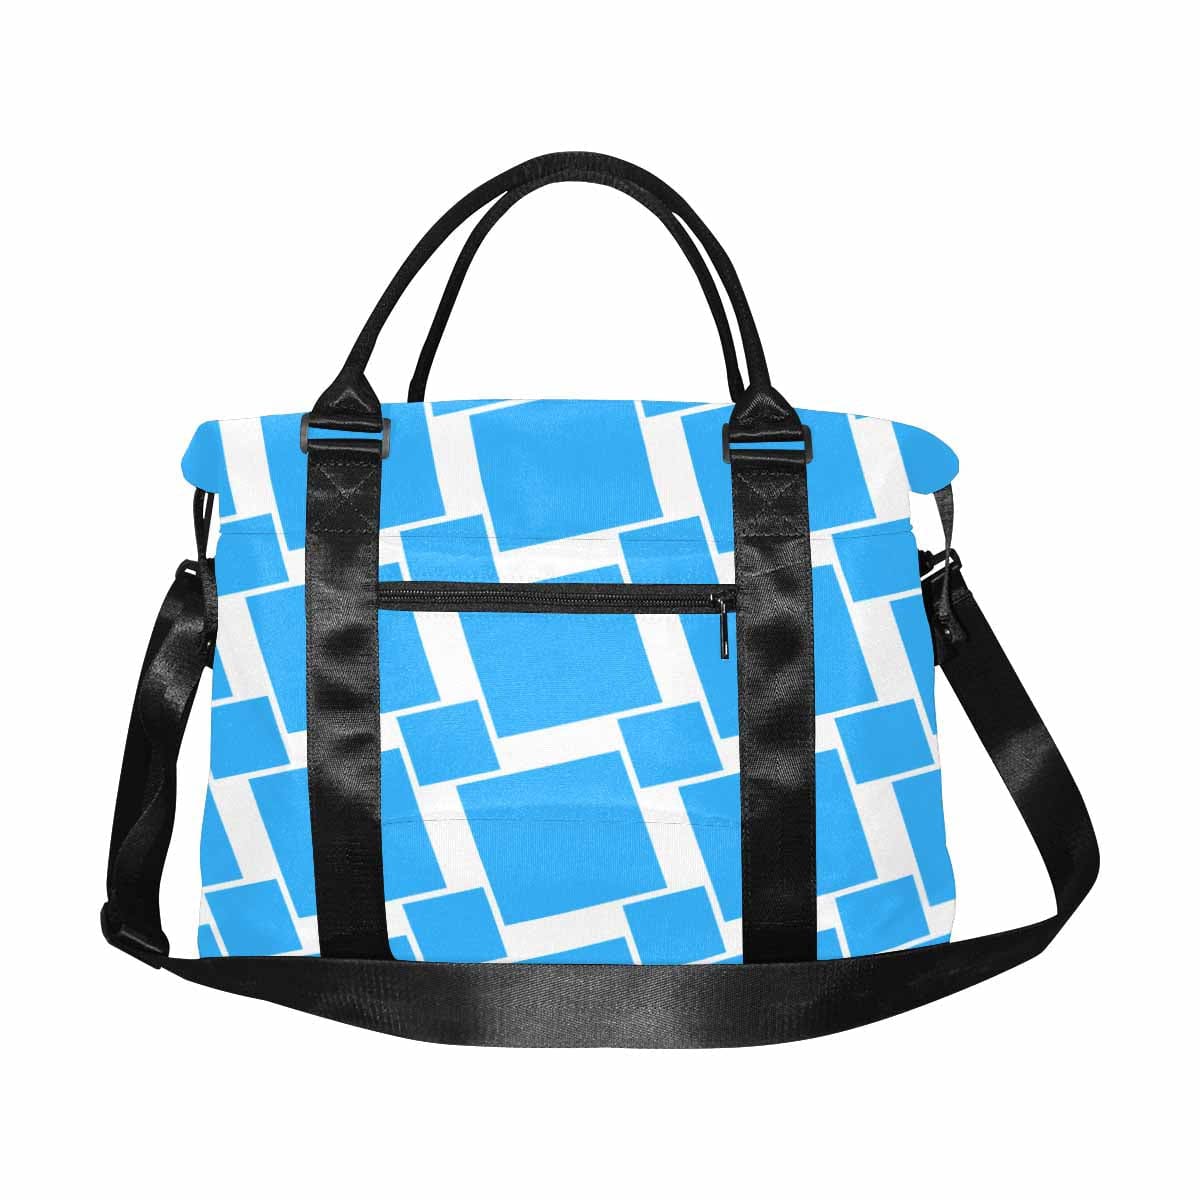 Duffle Bag - Large Capacity - Blue - Bags | Travel Bags | Canvas Carry